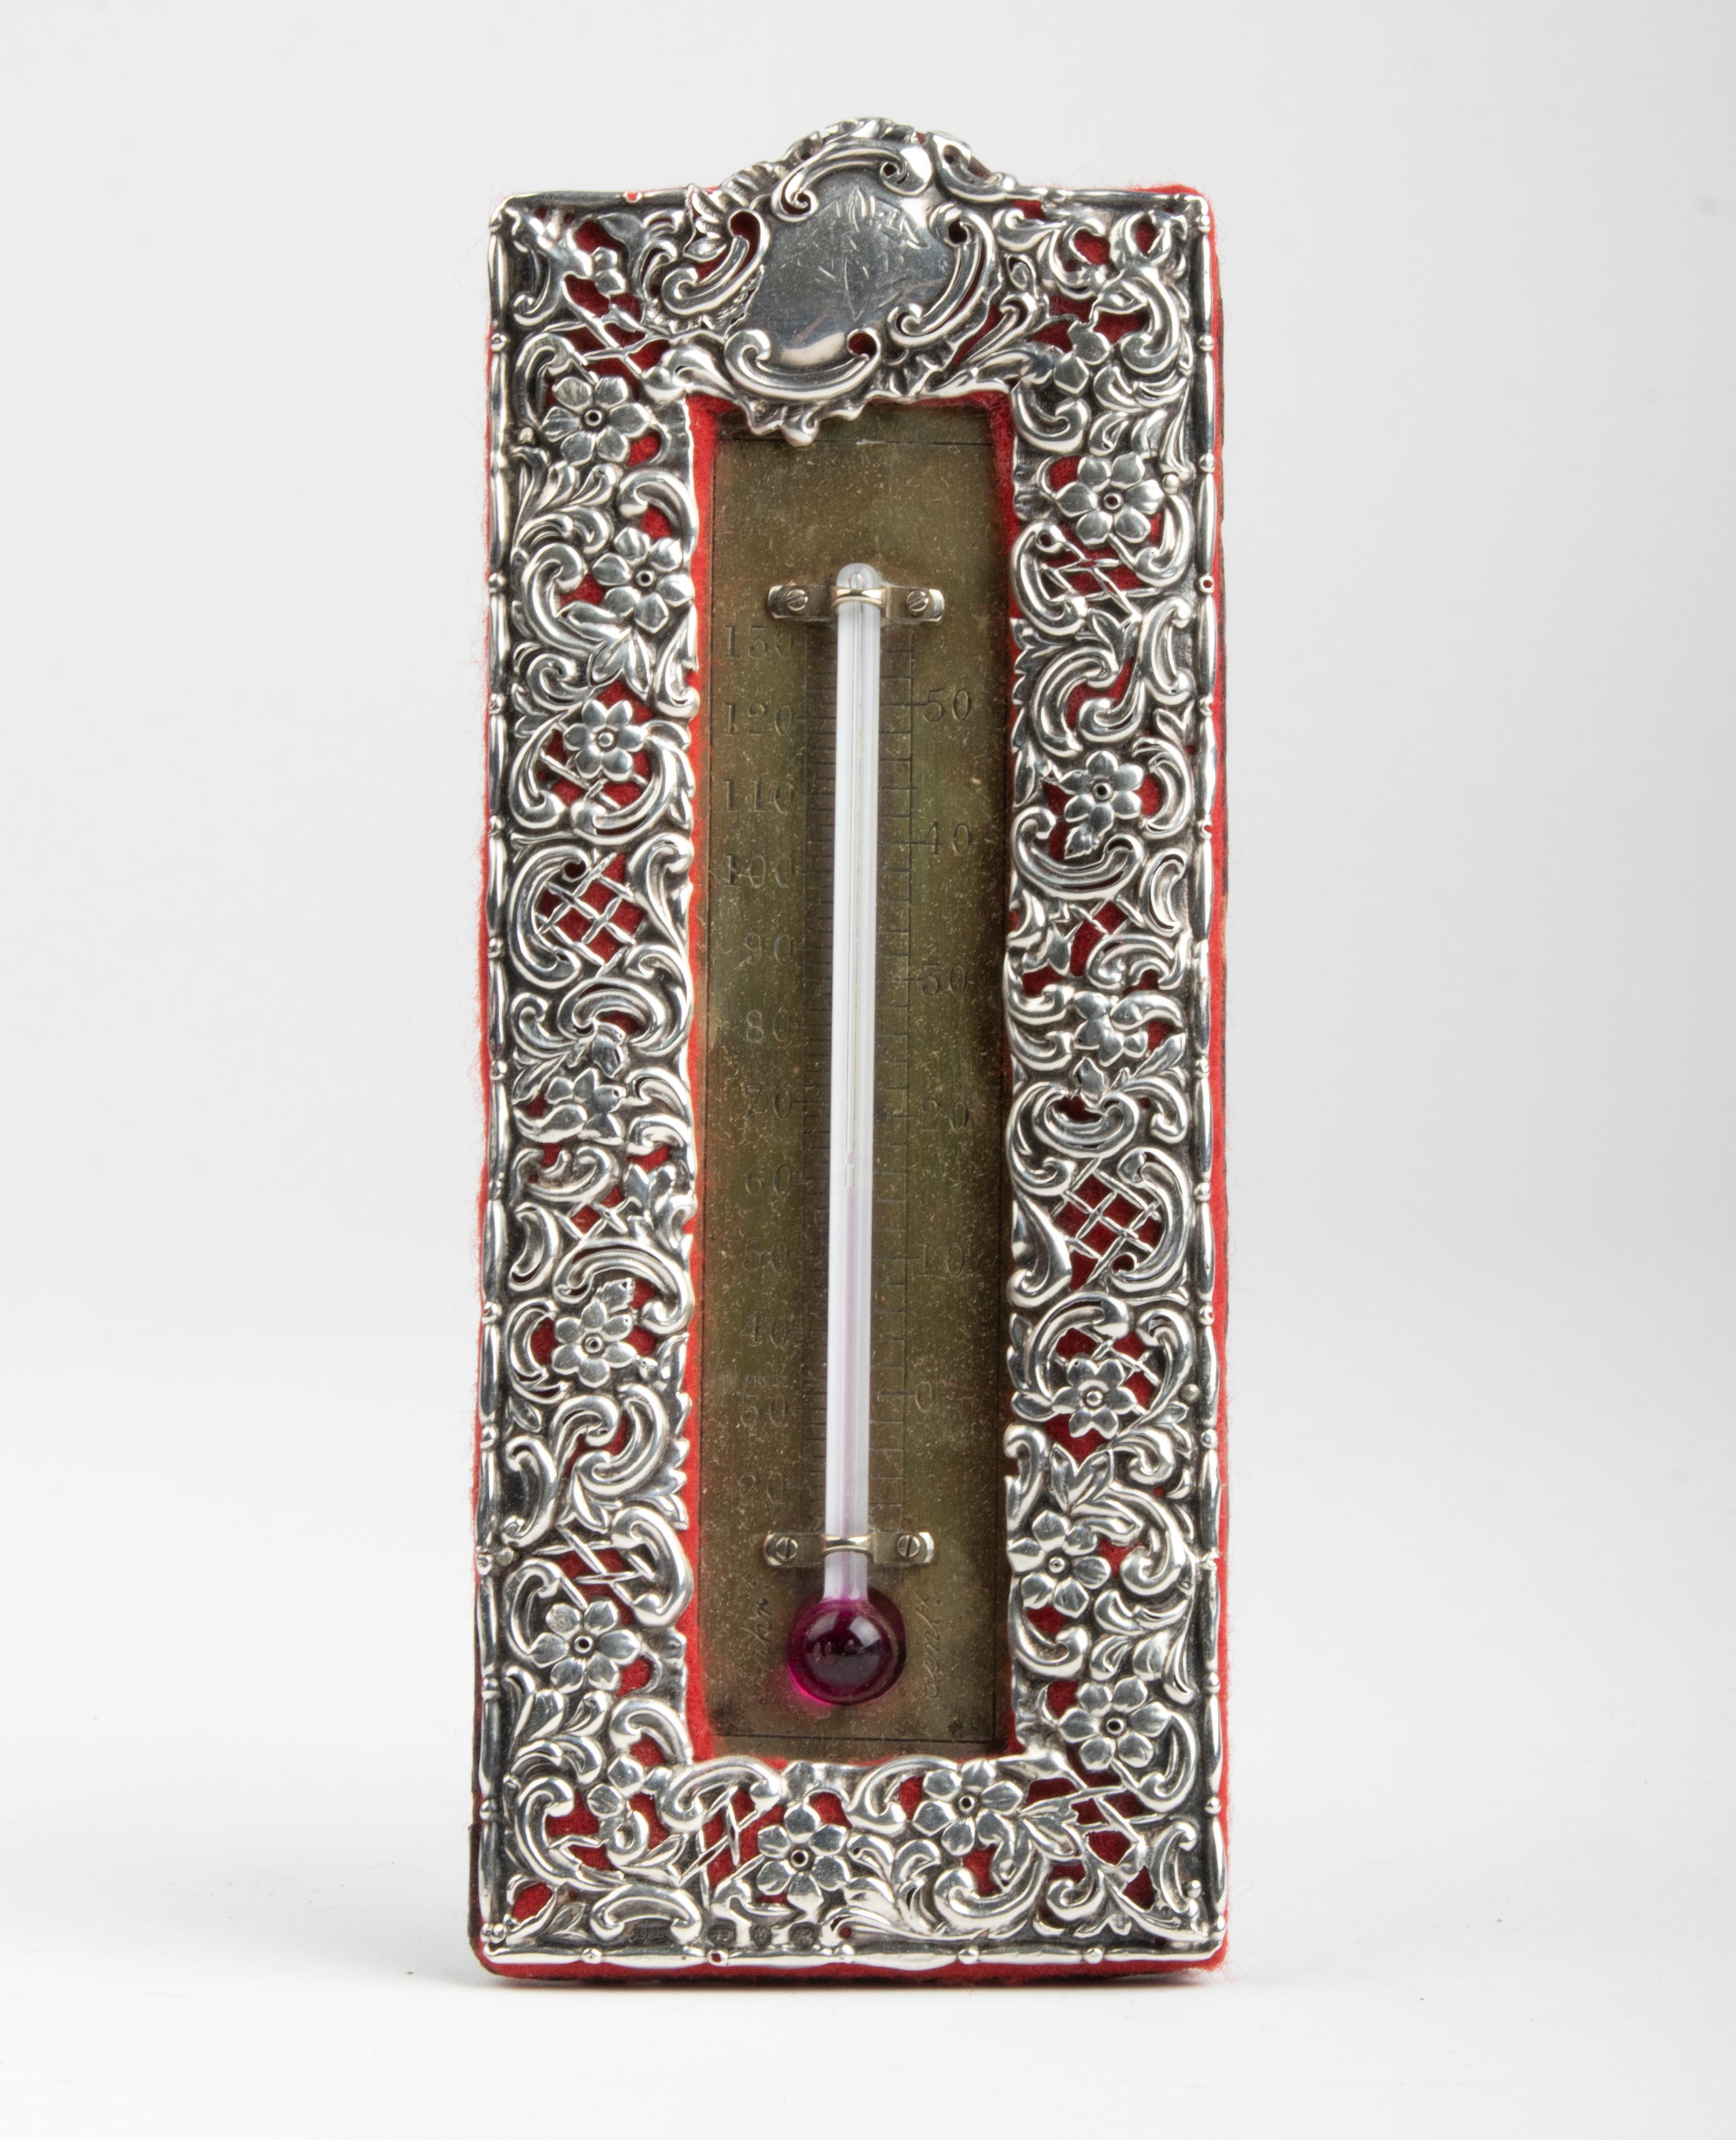 Beautiful antique Victorian thermometer. The front is made of sterling silver. This is marked with the hallmarks of Birmingham 1887 (year letter N) and the maker H. Matthews. This English maker produced a wide variety of silverware in the late 19th